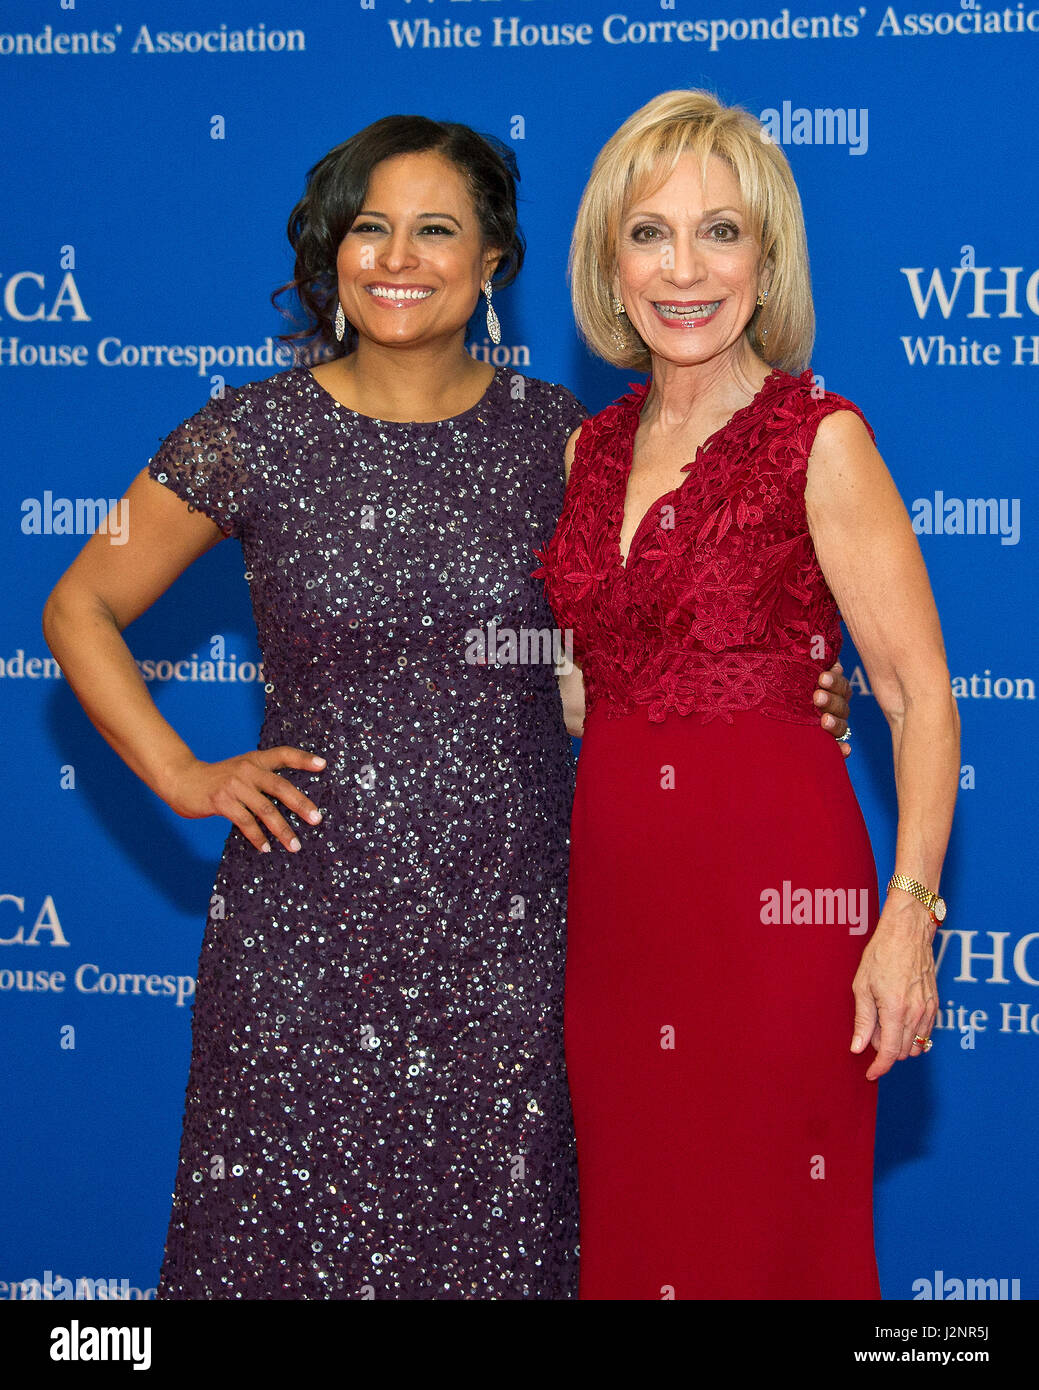 Washington, Us. 29th Apr, 2017. NBC News White House Correspondent Kristen Welker, left, and Andrea Mitchell arrive for the 2017 White House Correspondents Association Annual Dinner at the Washington Hilton Hotel on Saturday, April 29, 2017. Credit: Ron Sachs/CNP - NO WIRE SERVICE- Photo: Ron Sachs/Consolidated/dpa/Alamy Live News Stock Photo